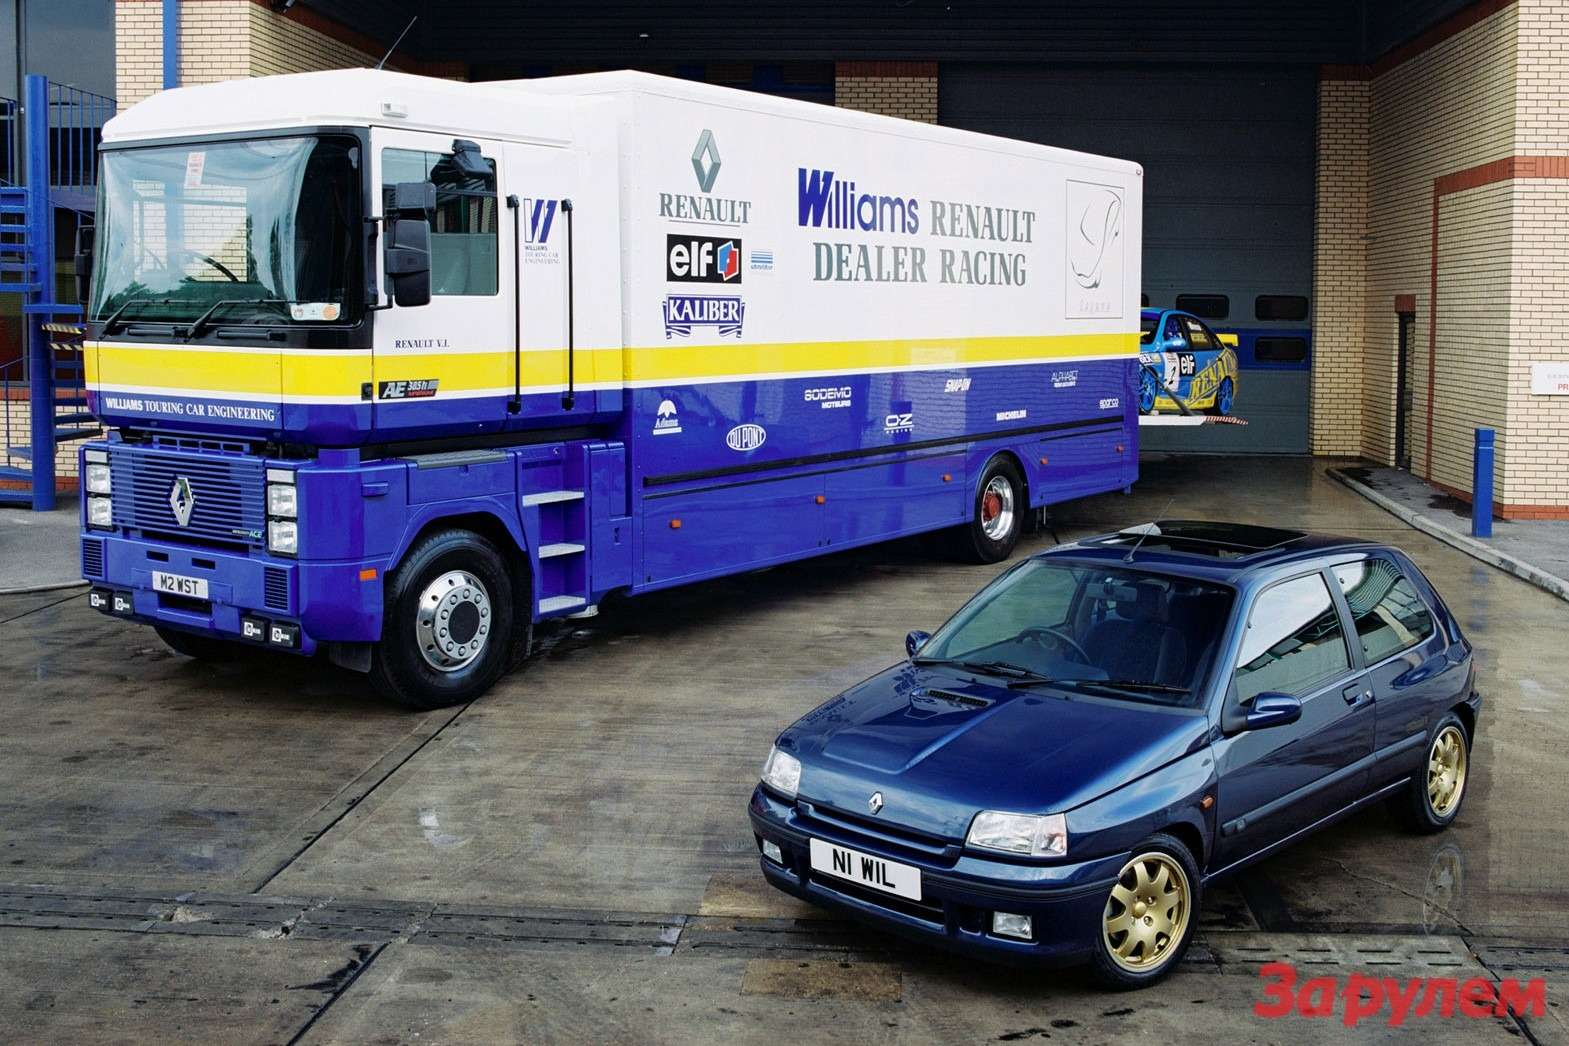 Renault Clio Williams side-front view 2